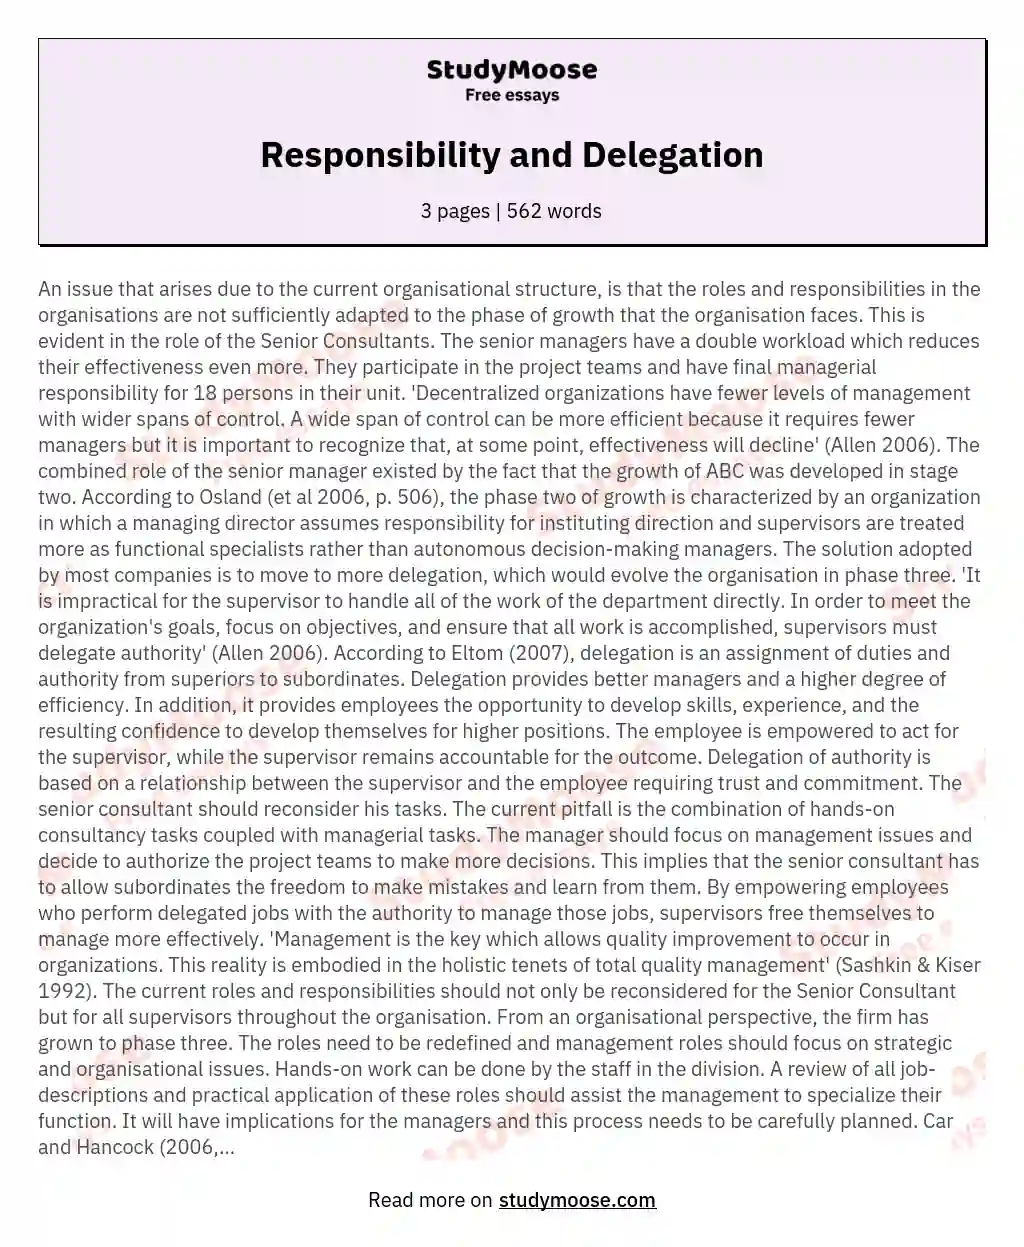 Responsibility and Delegation essay